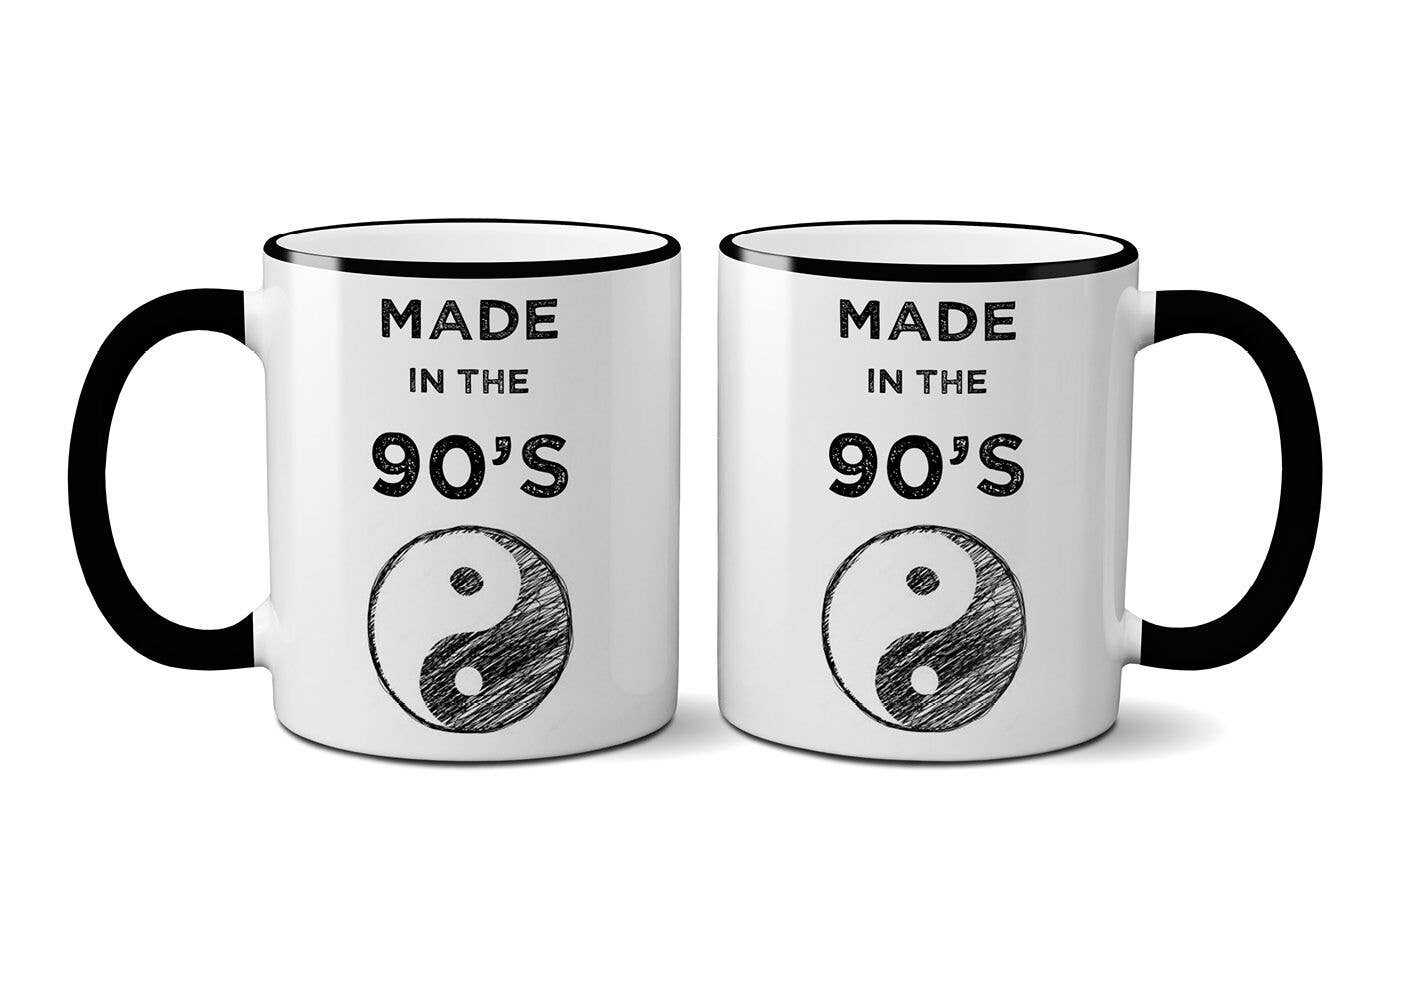 Made in the 90’s Mug